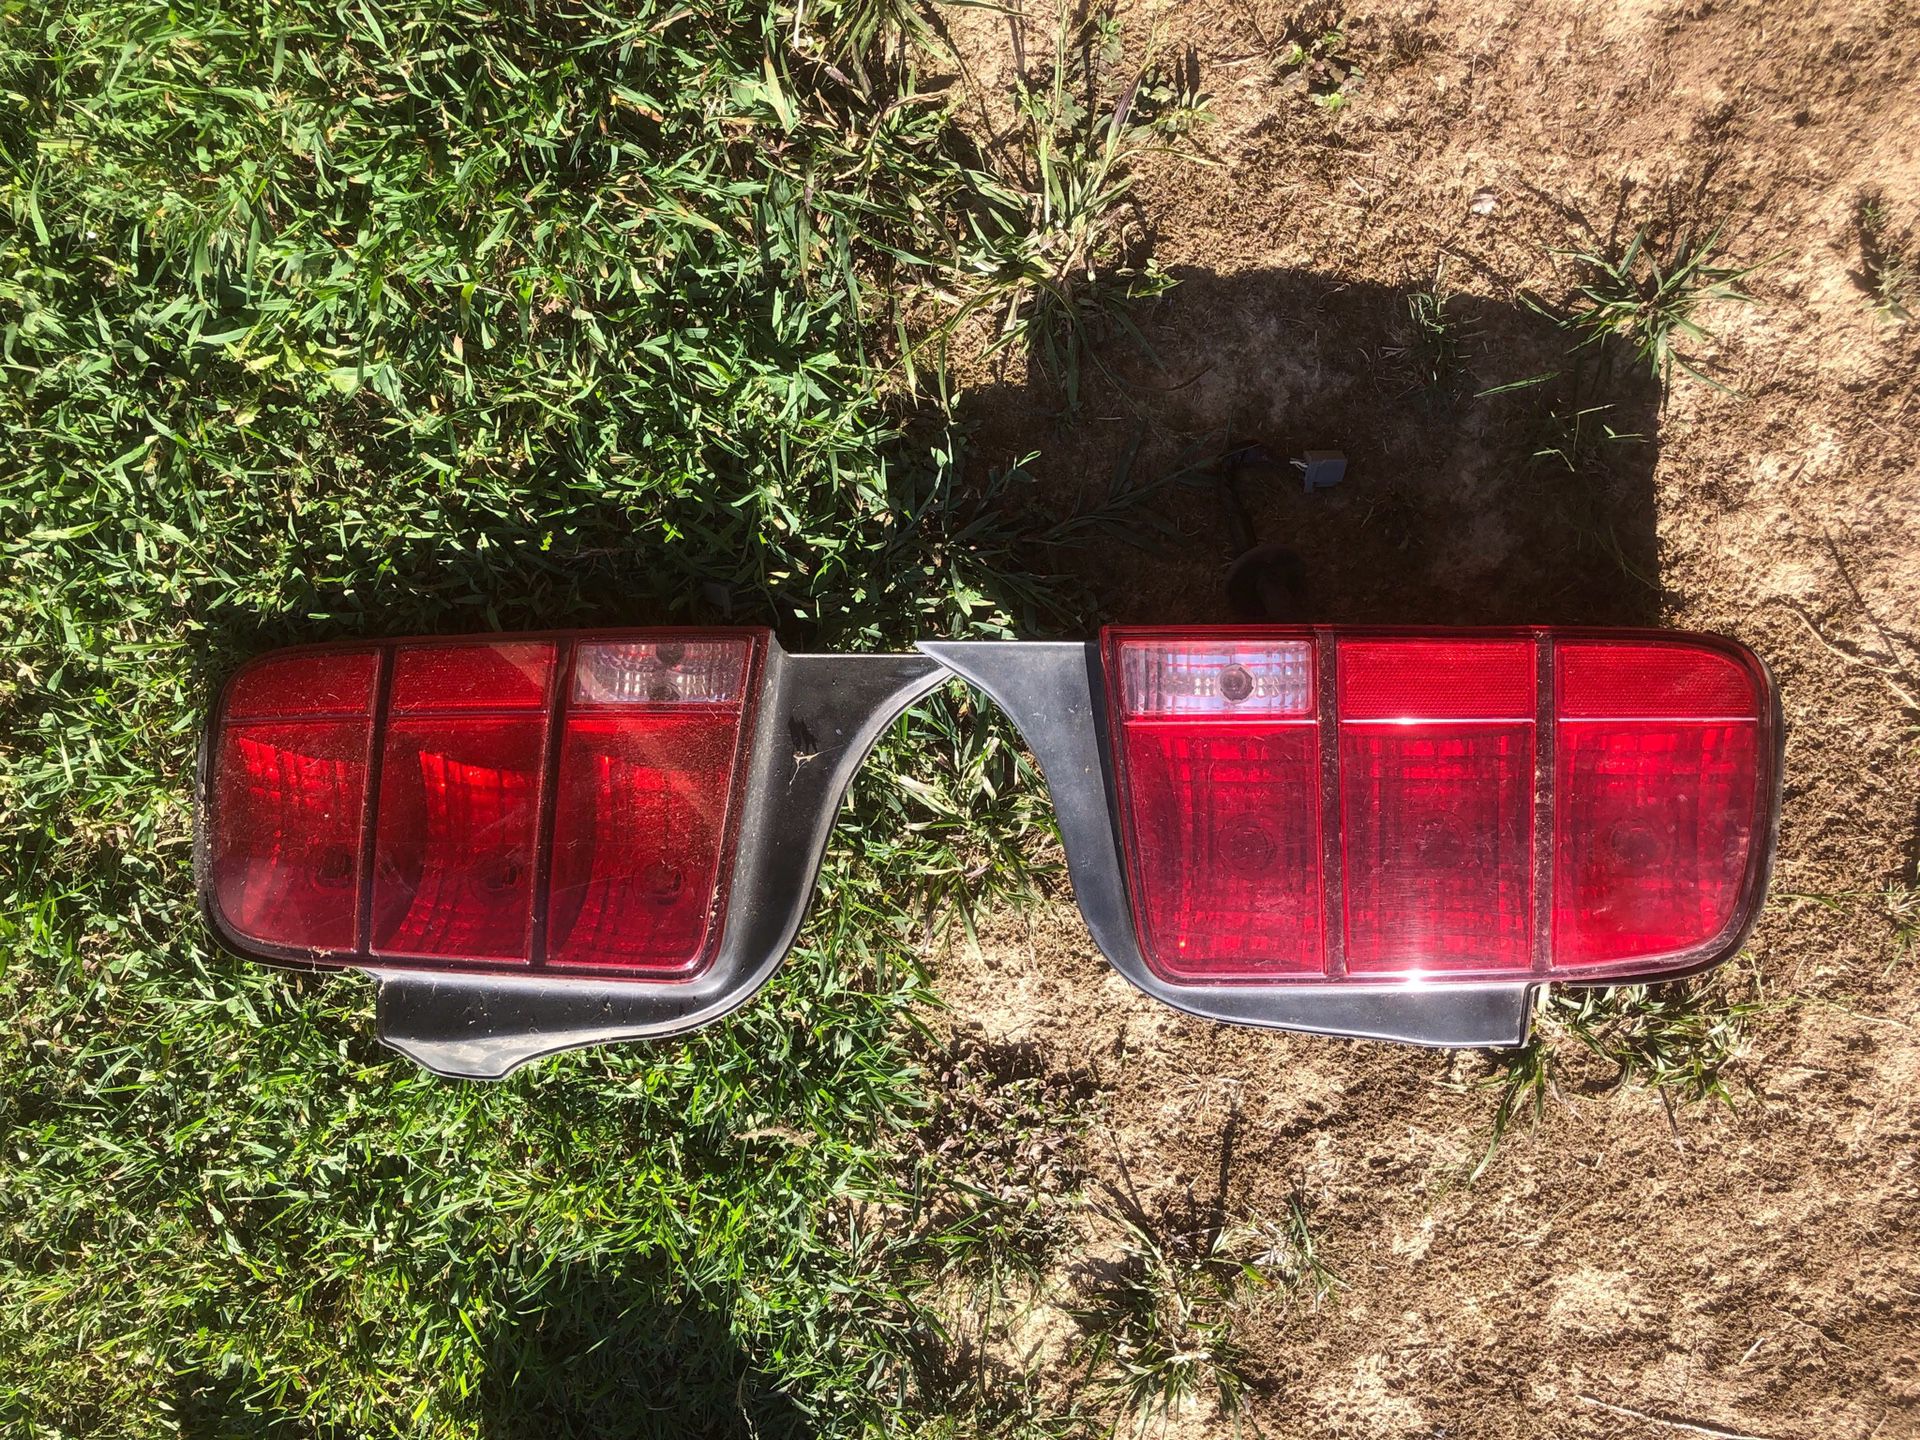 05-09 Mustang Taillights 